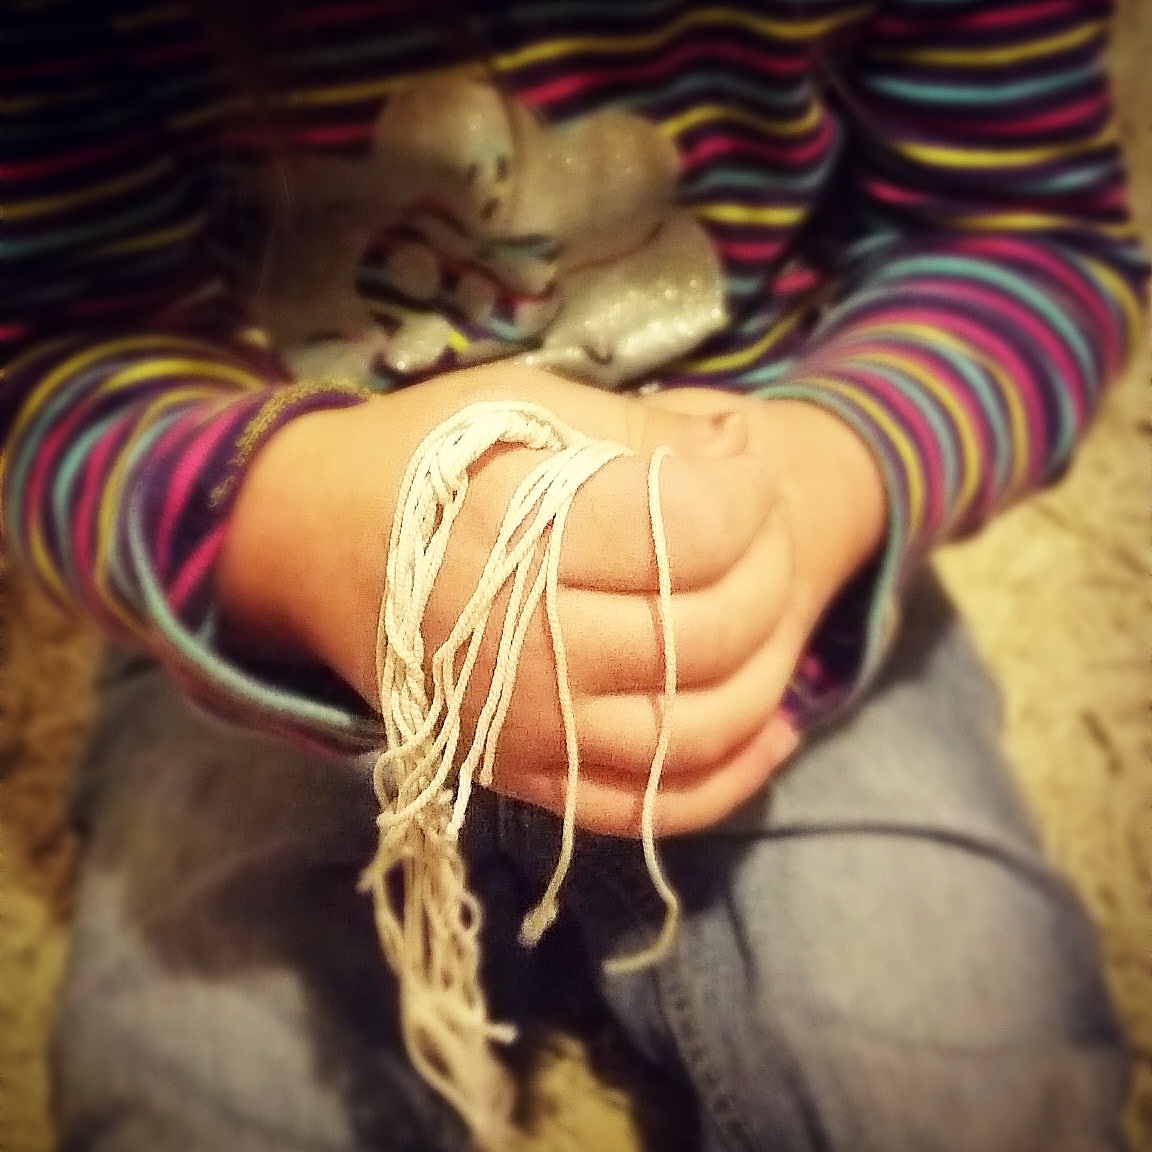 Is it possible to raise modern kids with a less gendered tone? And other thoughts on my tzitzit-wearing daughter